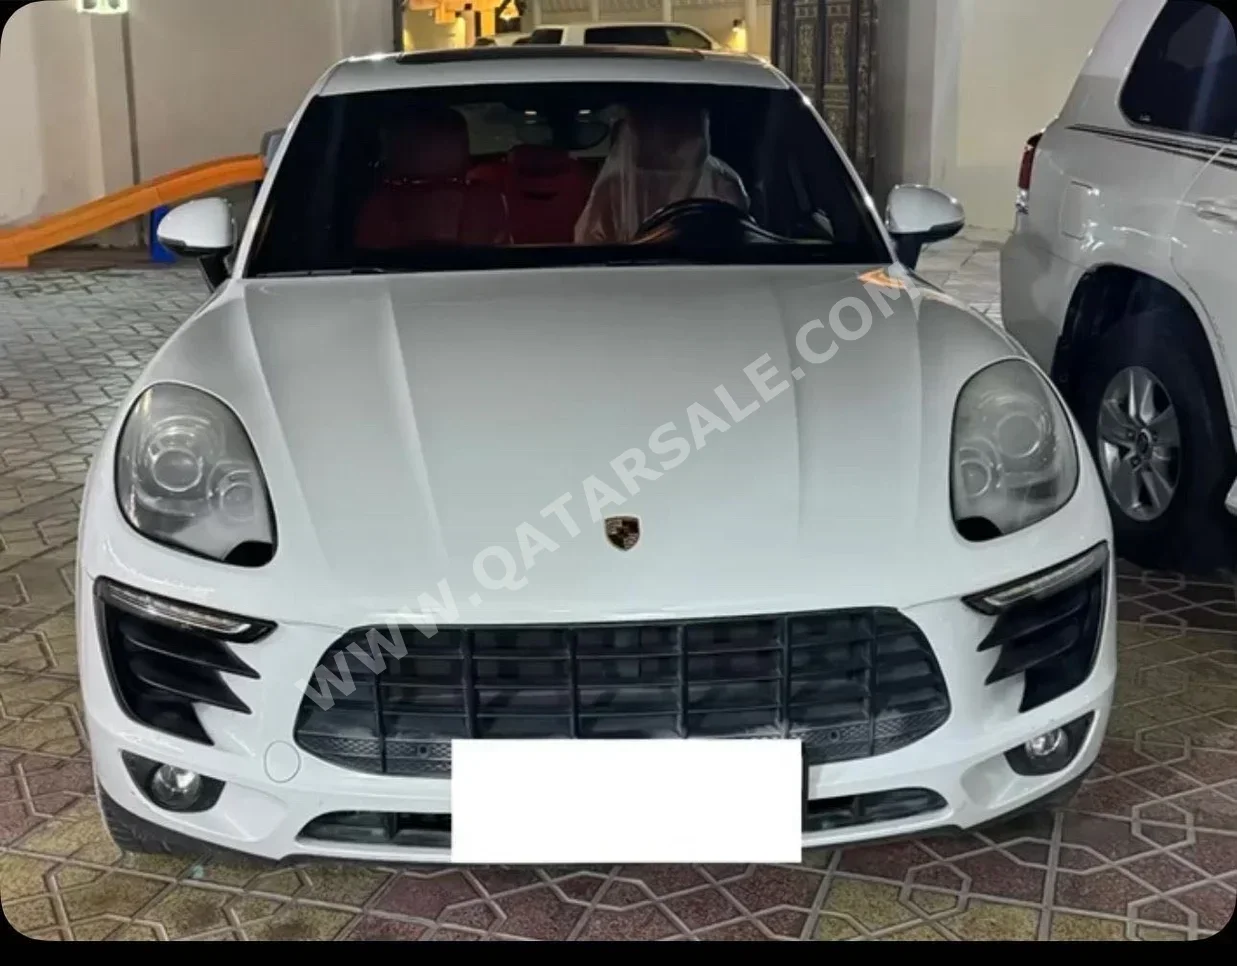 Porsche  Macan  S  2015  Automatic  200,000 Km  6 Cylinder  Four Wheel Drive (4WD)  SUV  Pearl Matte  With Warranty